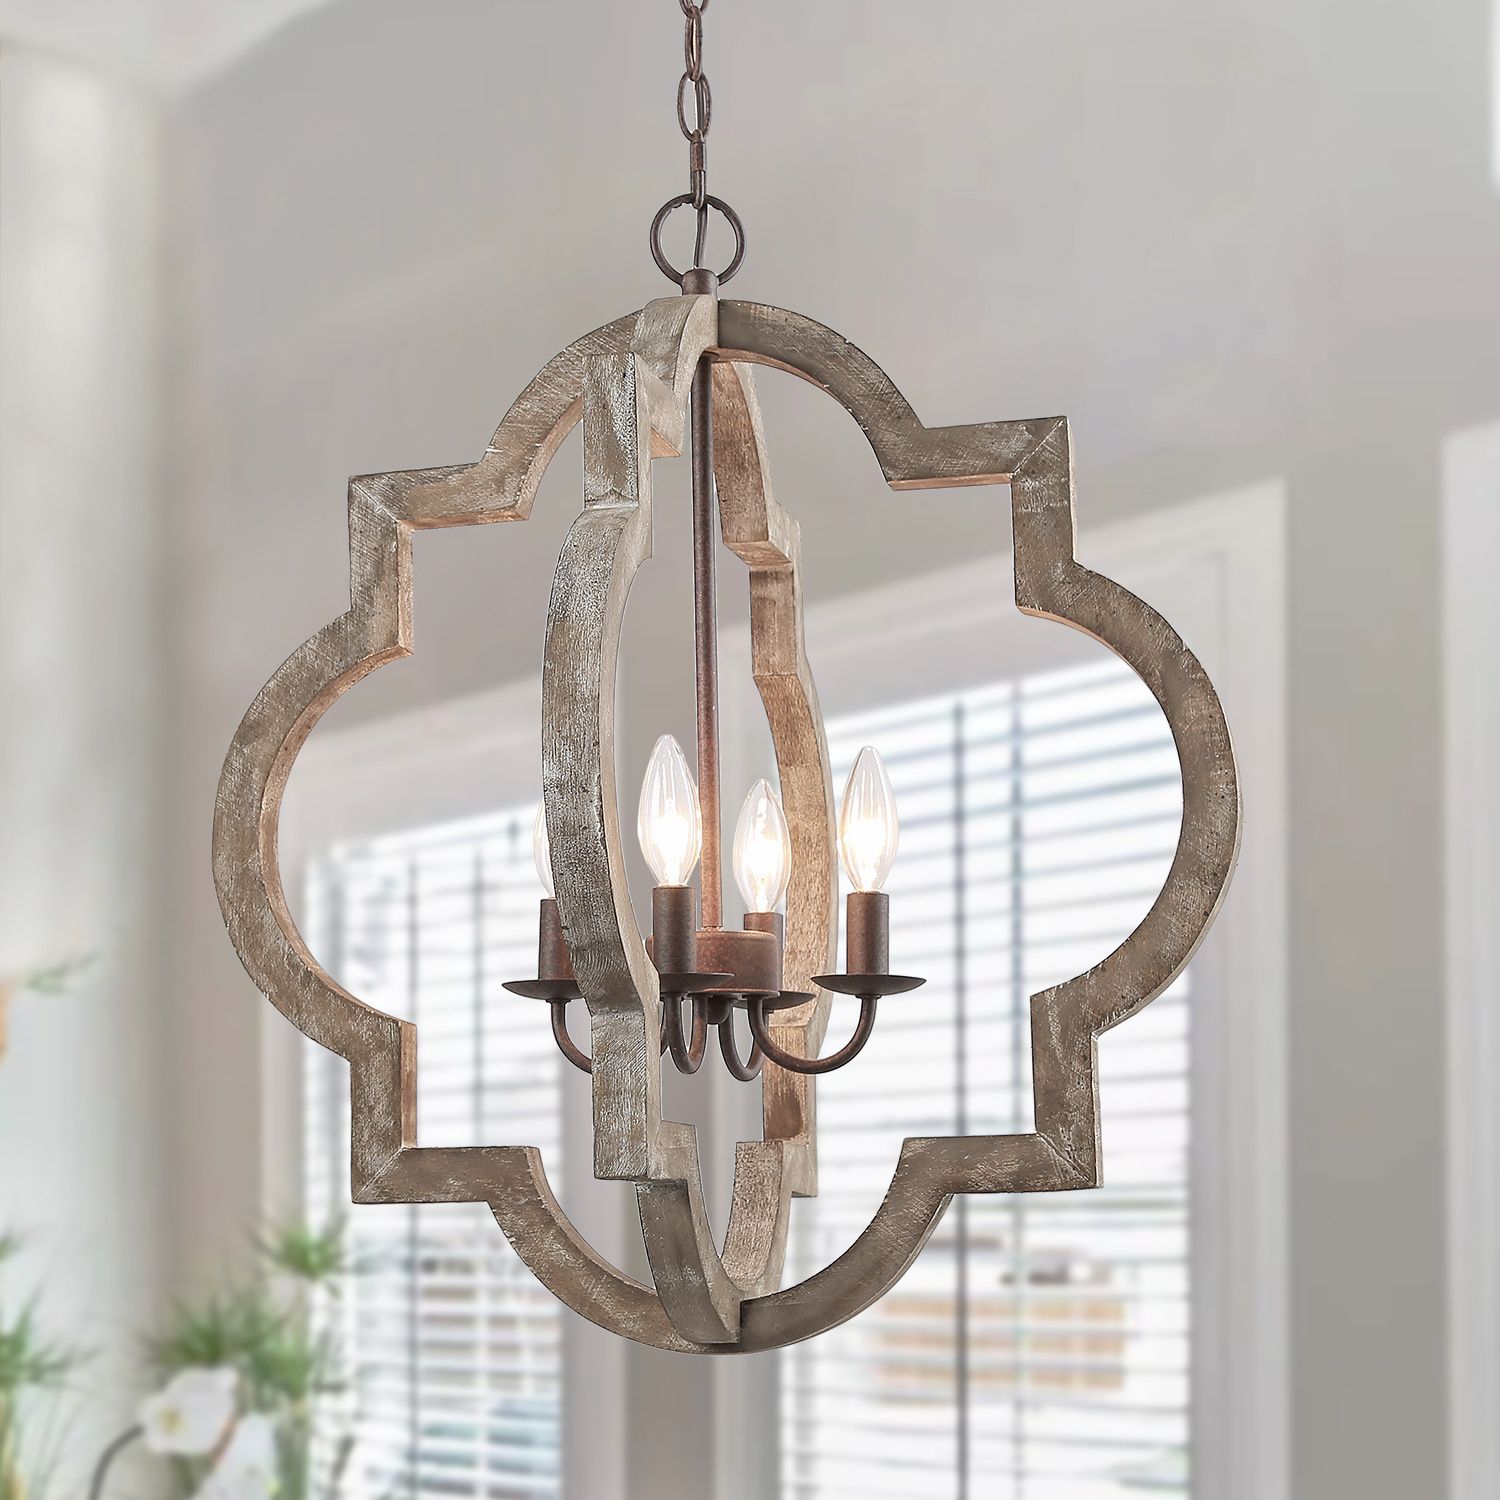 Lnc Farmhouse Lantern Chandelier, Handmade Wood 4 Light Fixtures Hanging  For Dining,living Room – Walmart In Cream And Rusty Lantern Chandeliers (View 8 of 15)